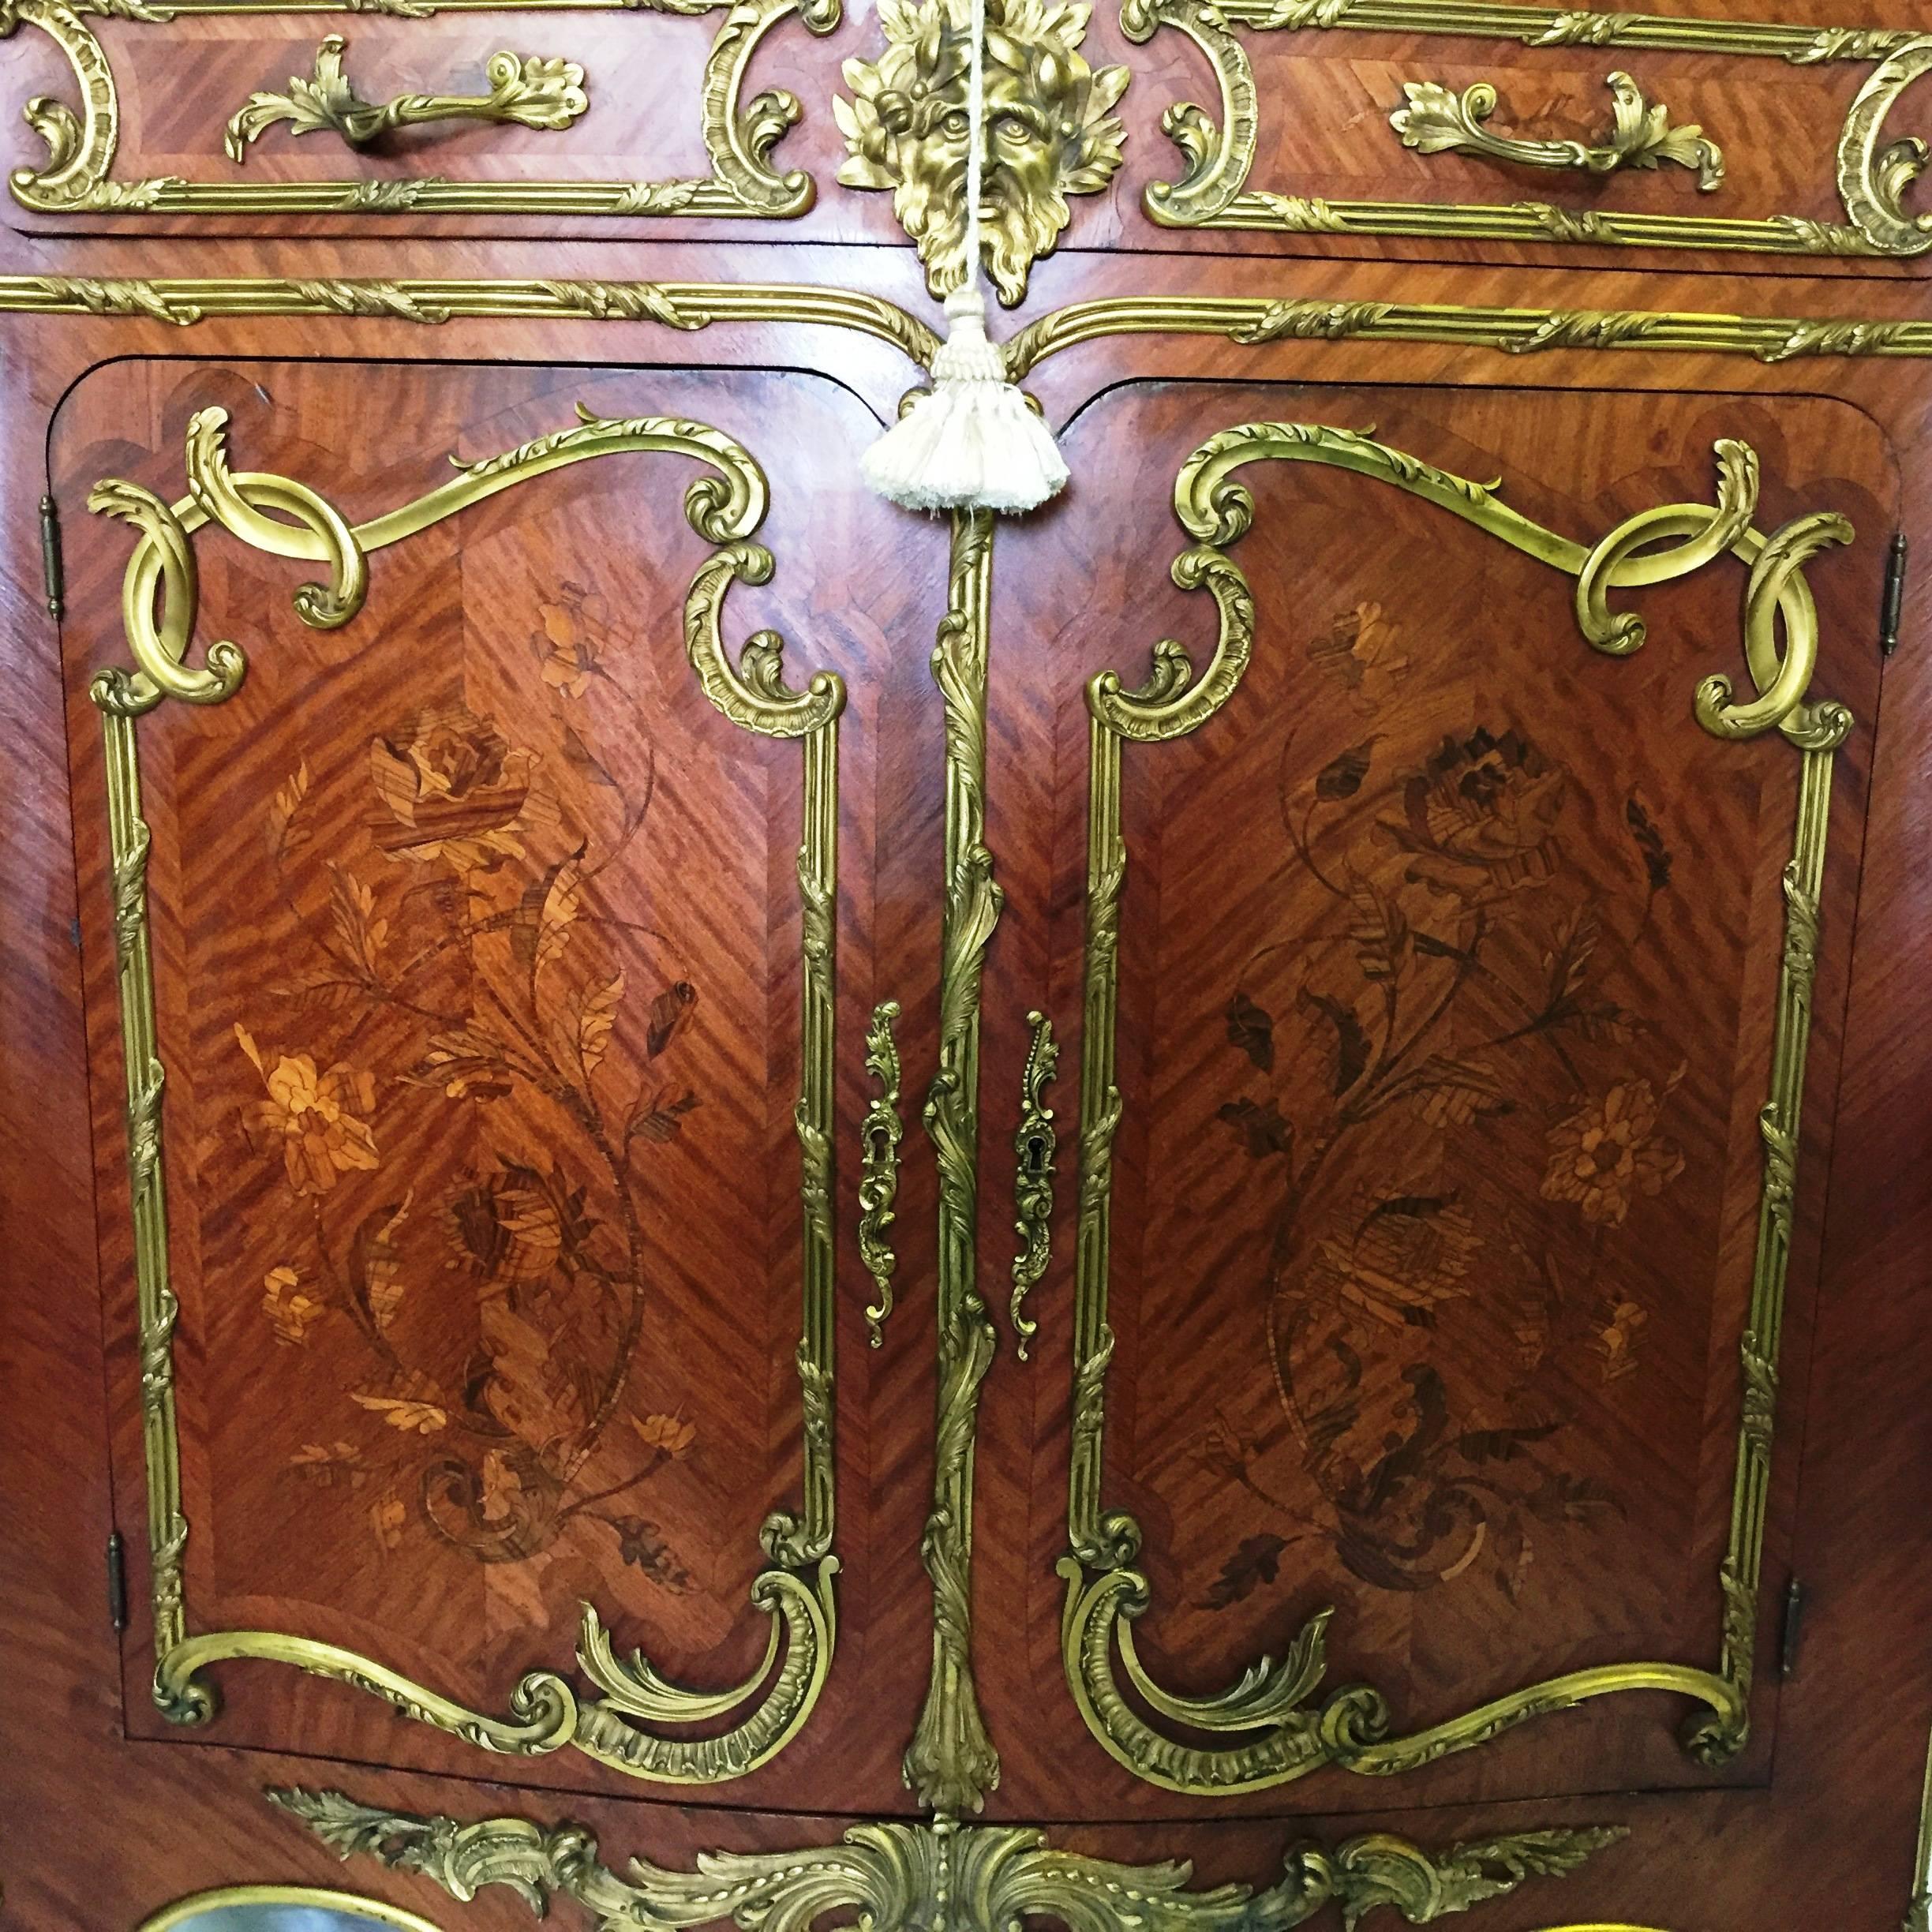 Kingwood Rare Pair of Louis XVI  style side cabinets after Joseph Zwiener  For Sale